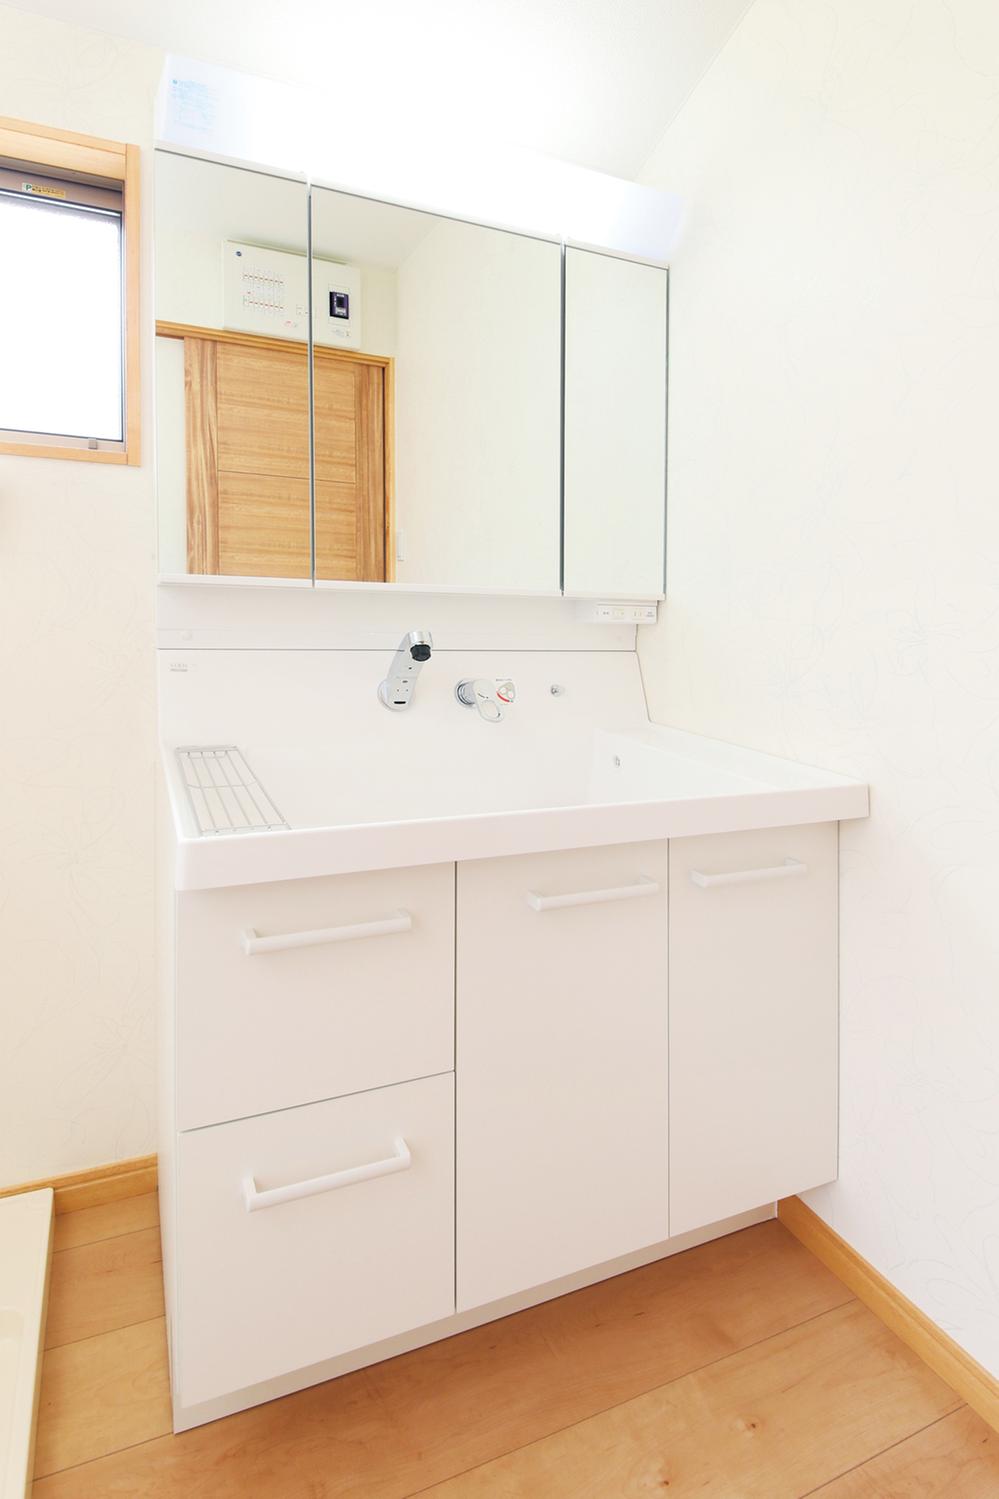 Same specifications photos (Other introspection). The vanity You are standard equipped with a three-sided mirror. Function that wife is happy, such as clean and easy to labor without drainage outlet and natural energy-saving Eco-handle has been enhanced